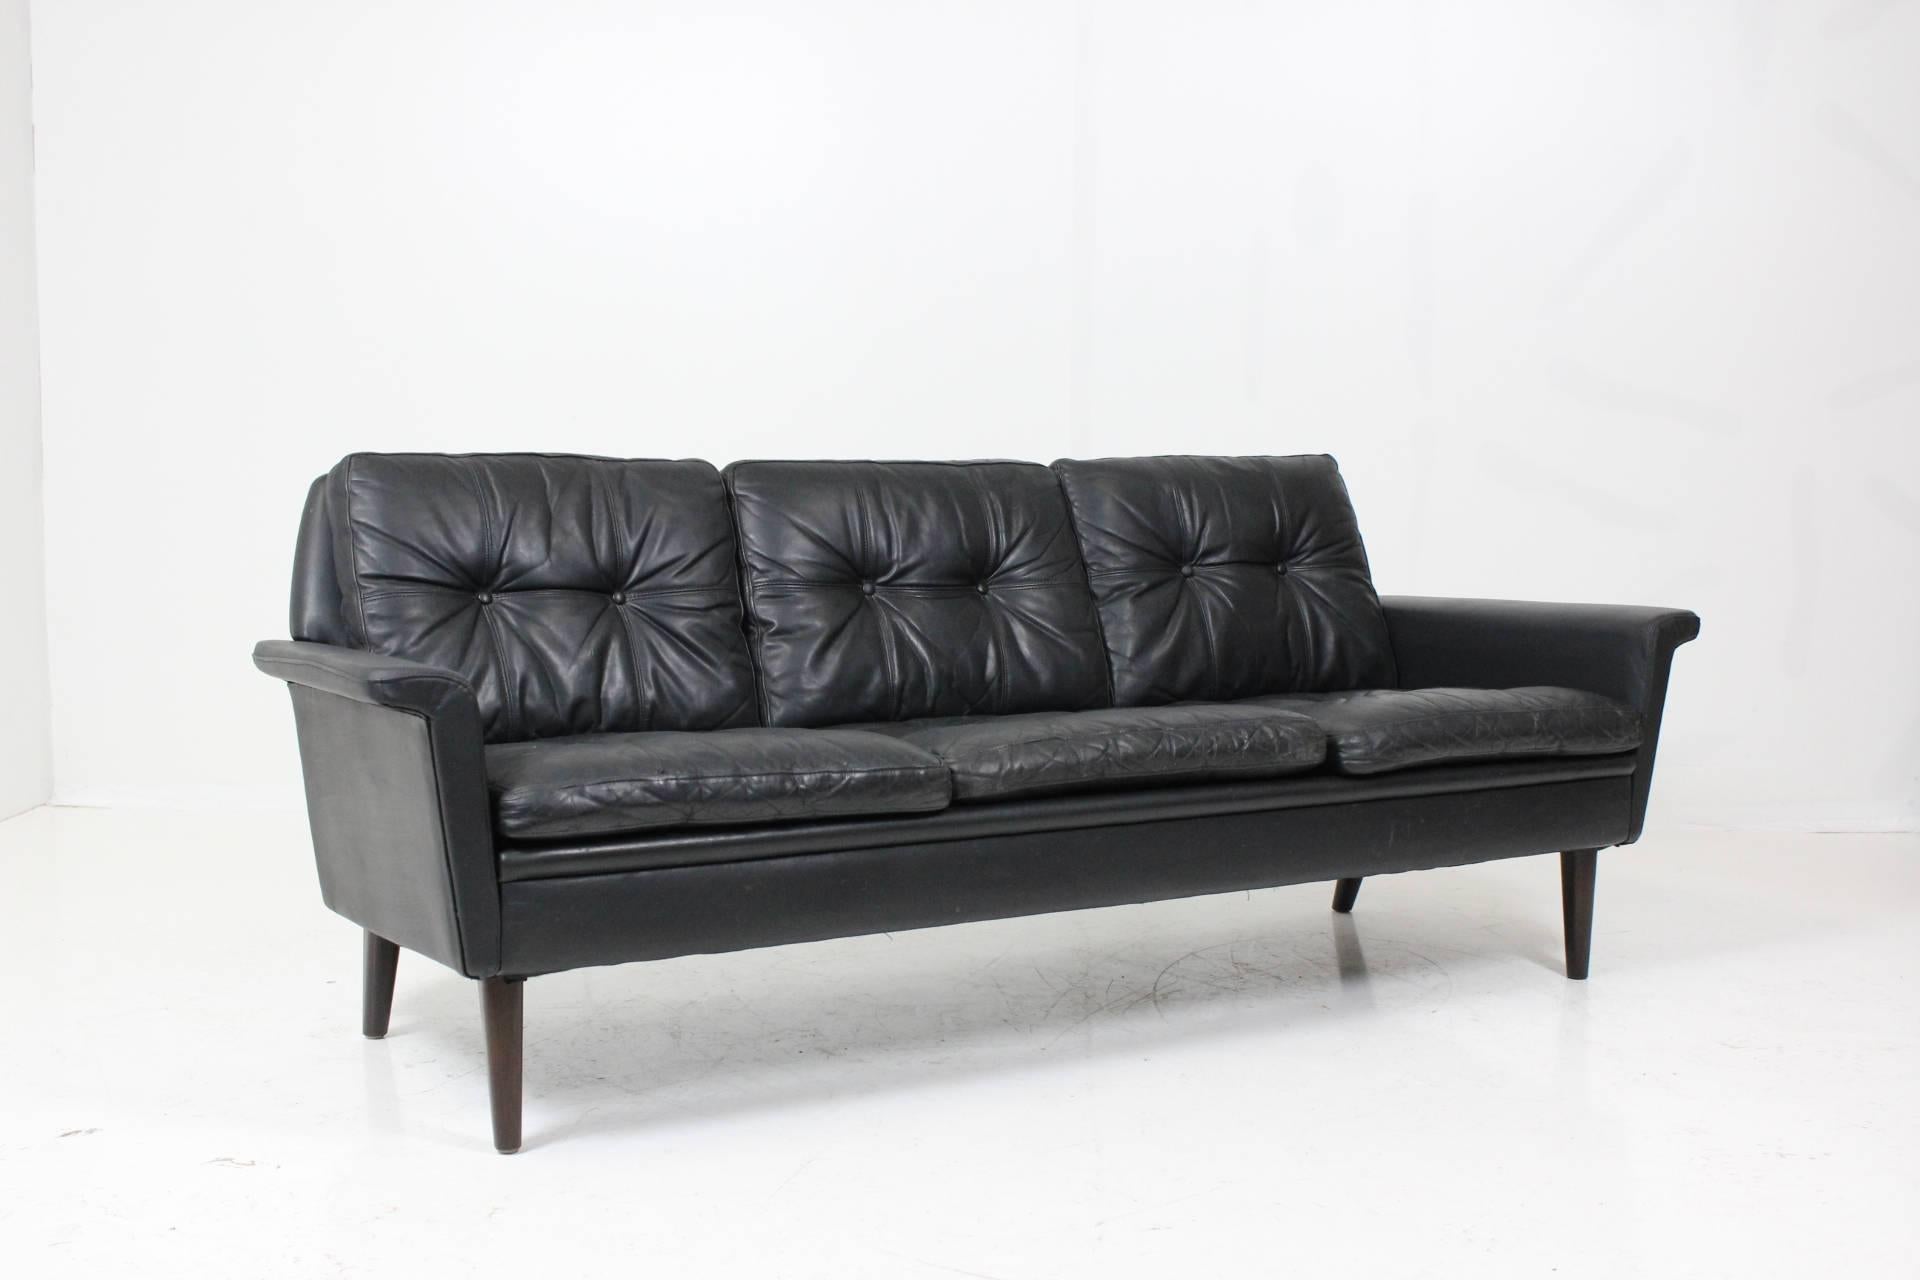 Classic Mid-Century design three-seat cushion sofa in black patinated leather by Hans Olsen's. Partly restored, new armrests leather upholstery, minor signs of wear, overall good condition.